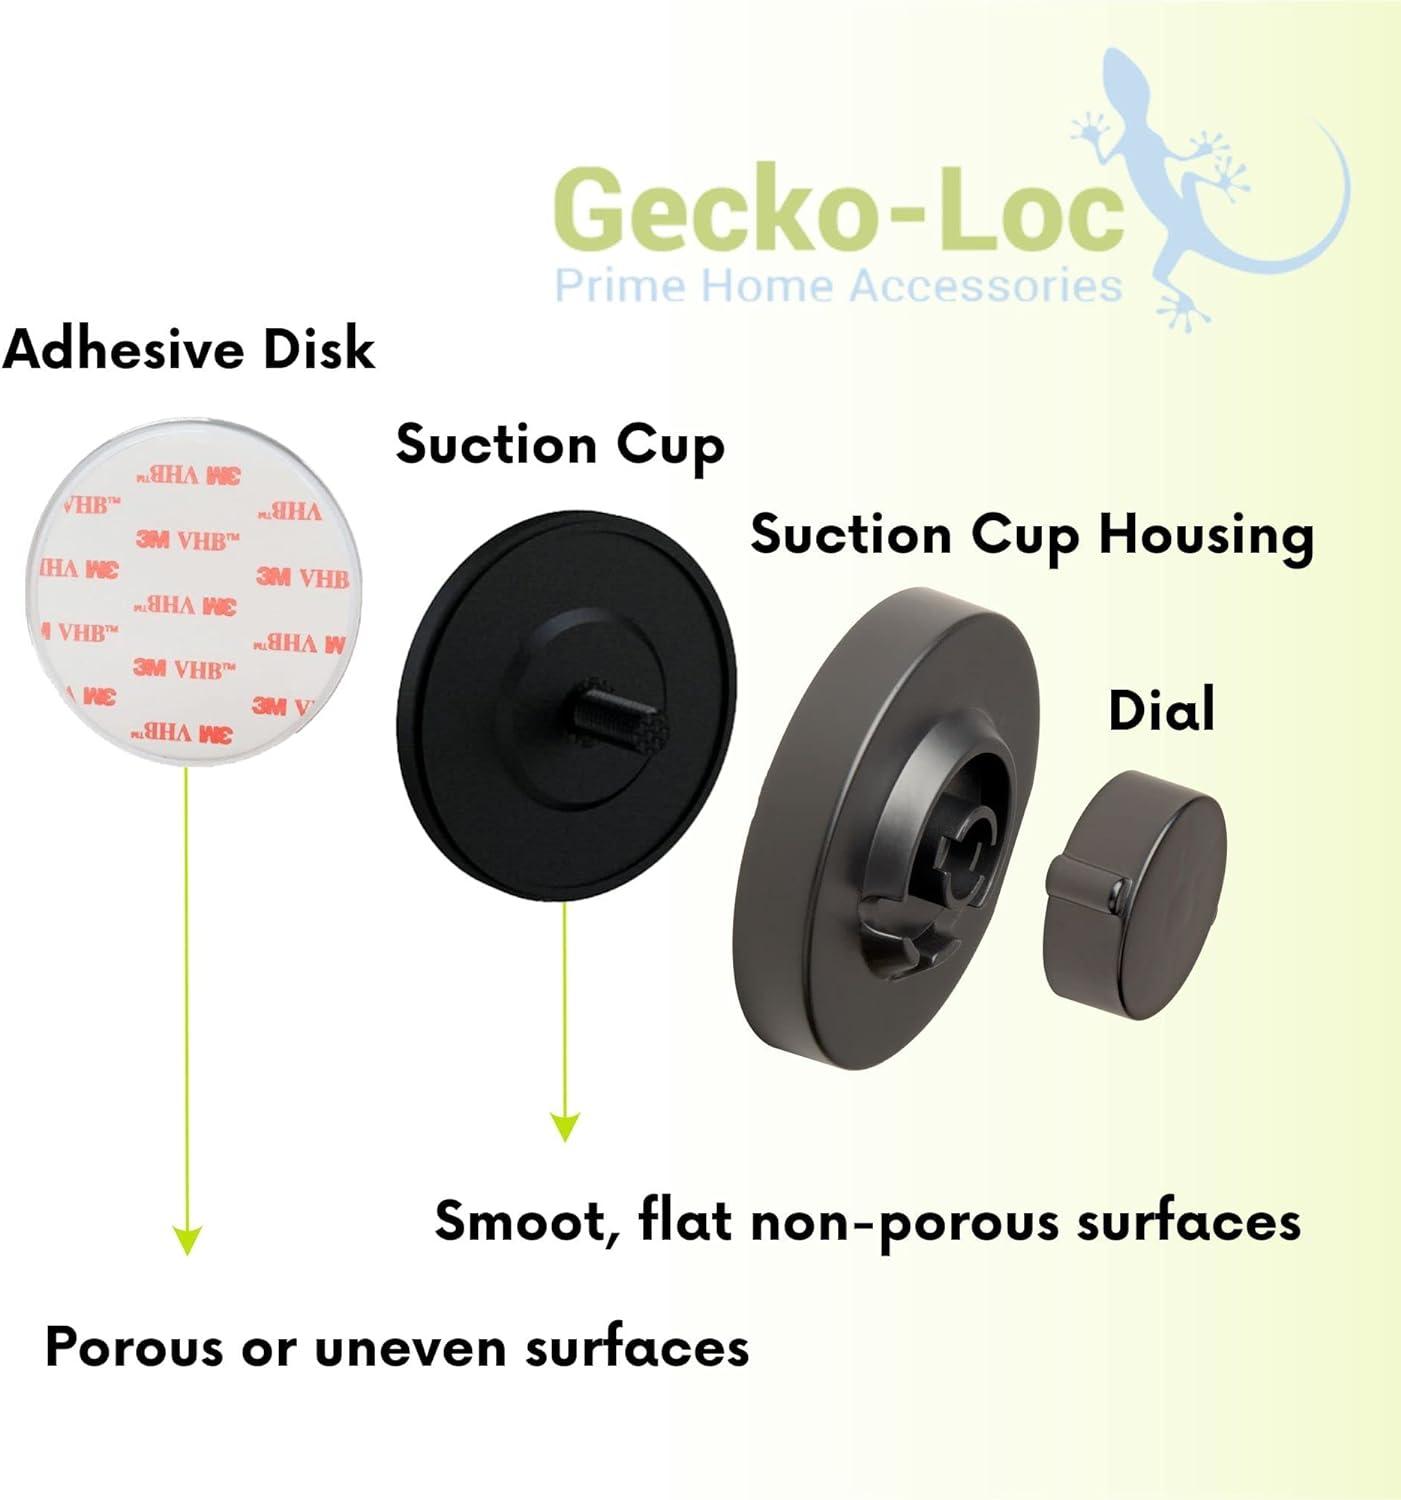 Gecko-Loc Matte Black Stainless Steel Shower Caddy with Suction Mount